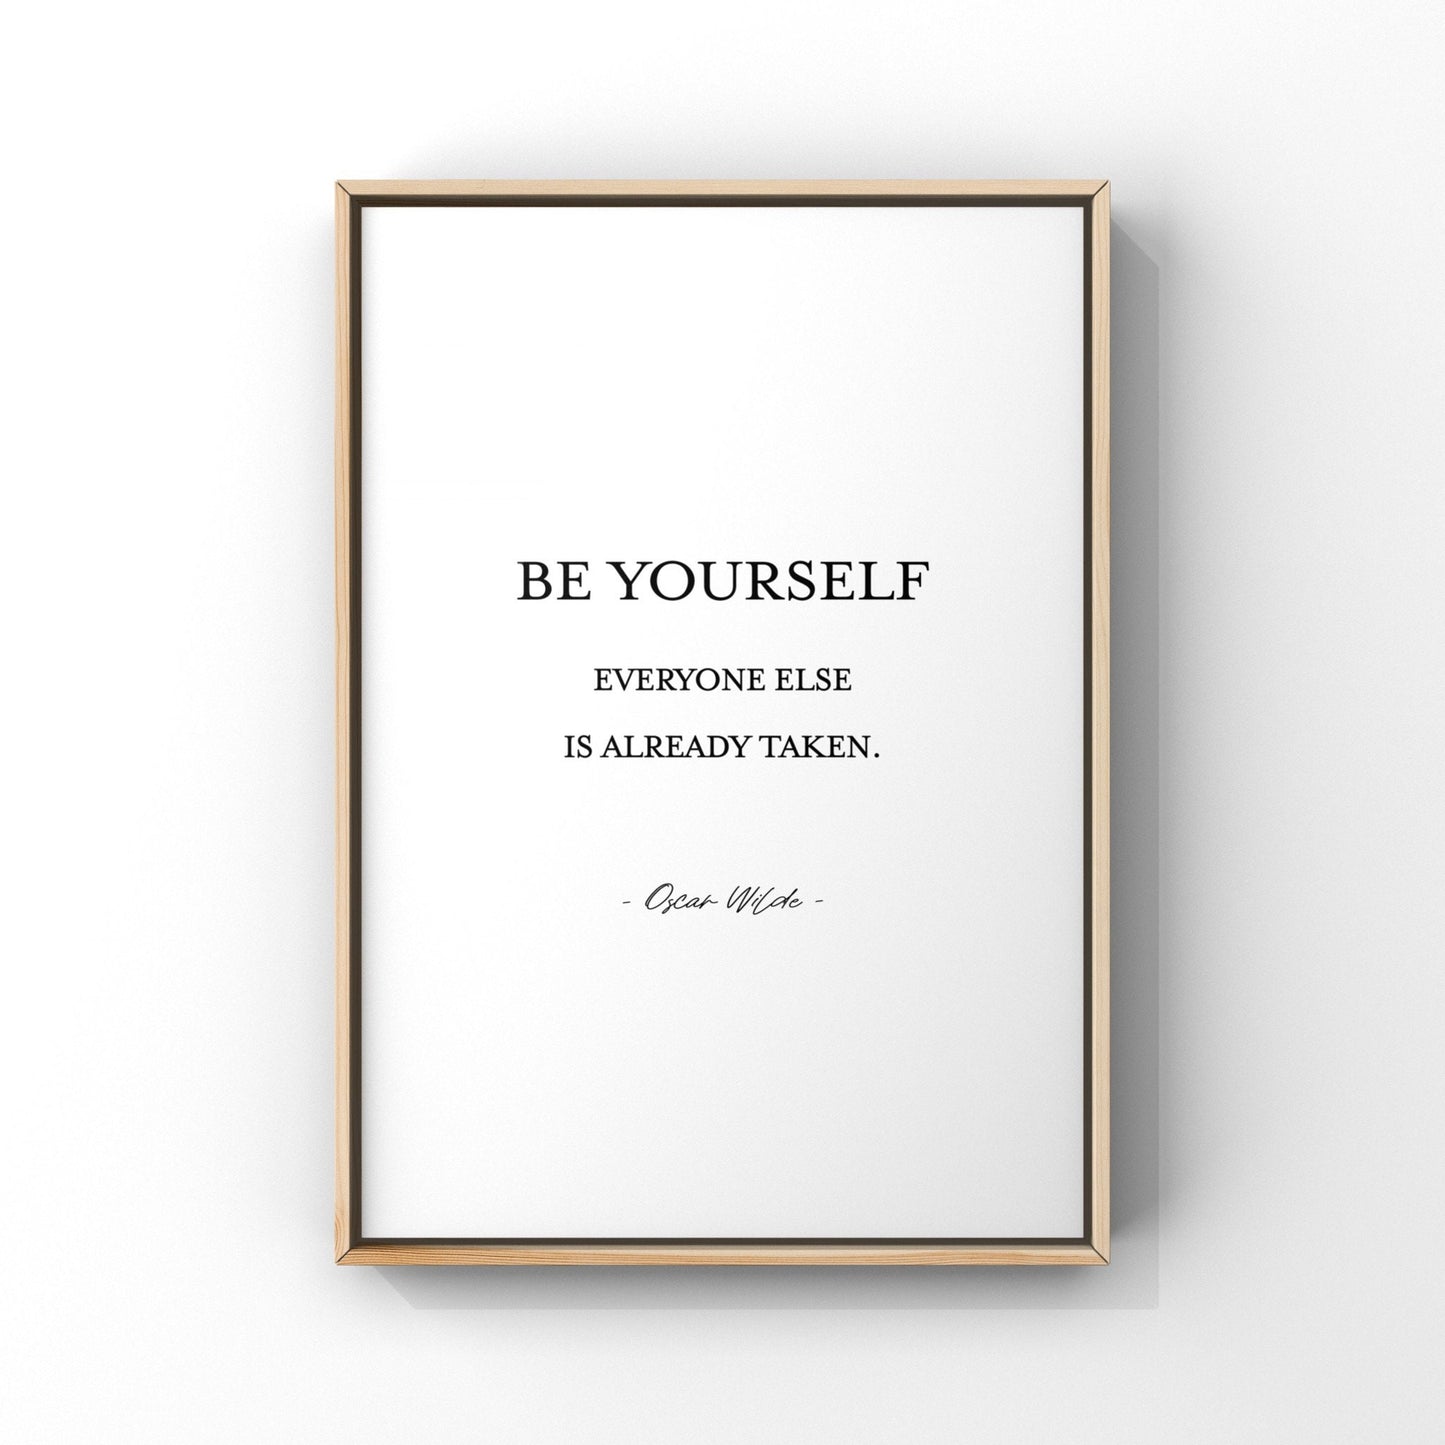 Be yourself everyone else is already taken,Oscar Wilde quote,Inspirational quote print,Classroom decor,Office decor,Motivational quote